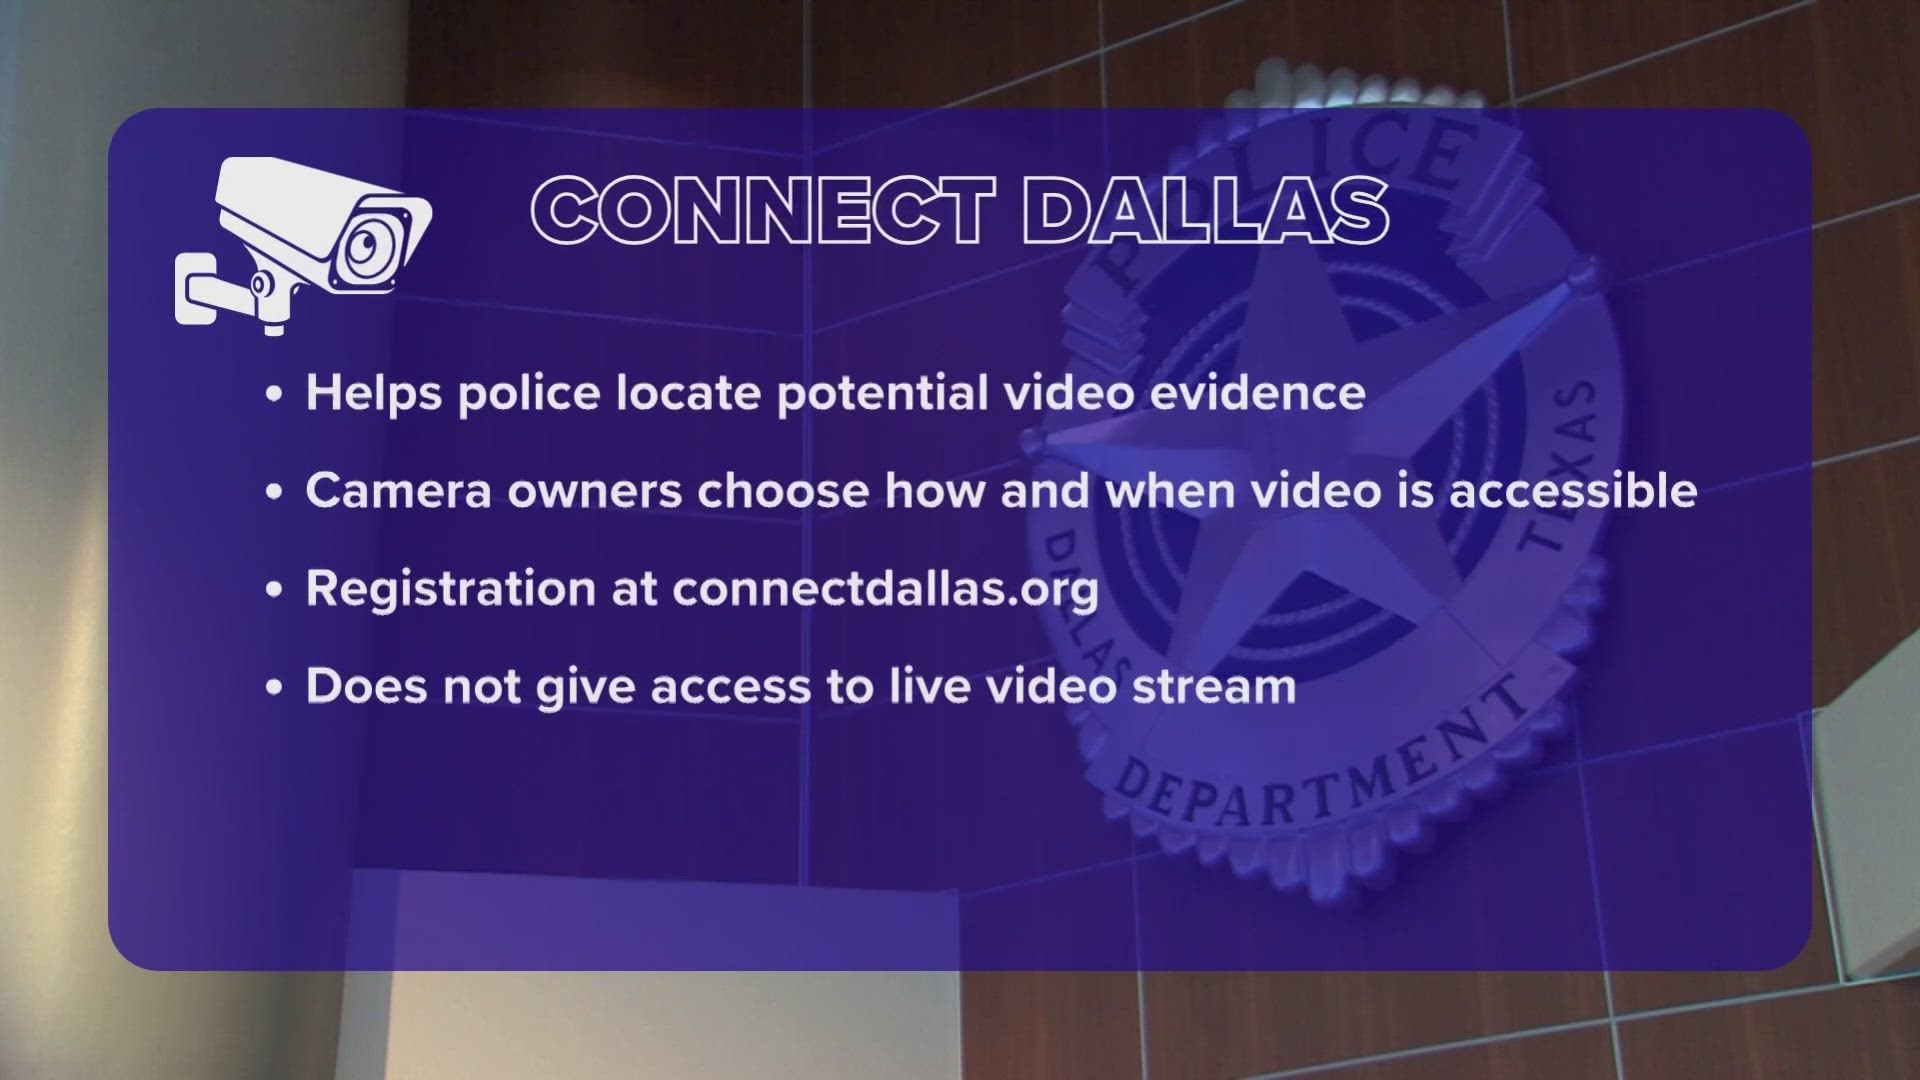 CONNECT DALLAS is a way for DPD to easily locate the nearest cameras in a designated area for an investigation, emergency event, or emergency response.